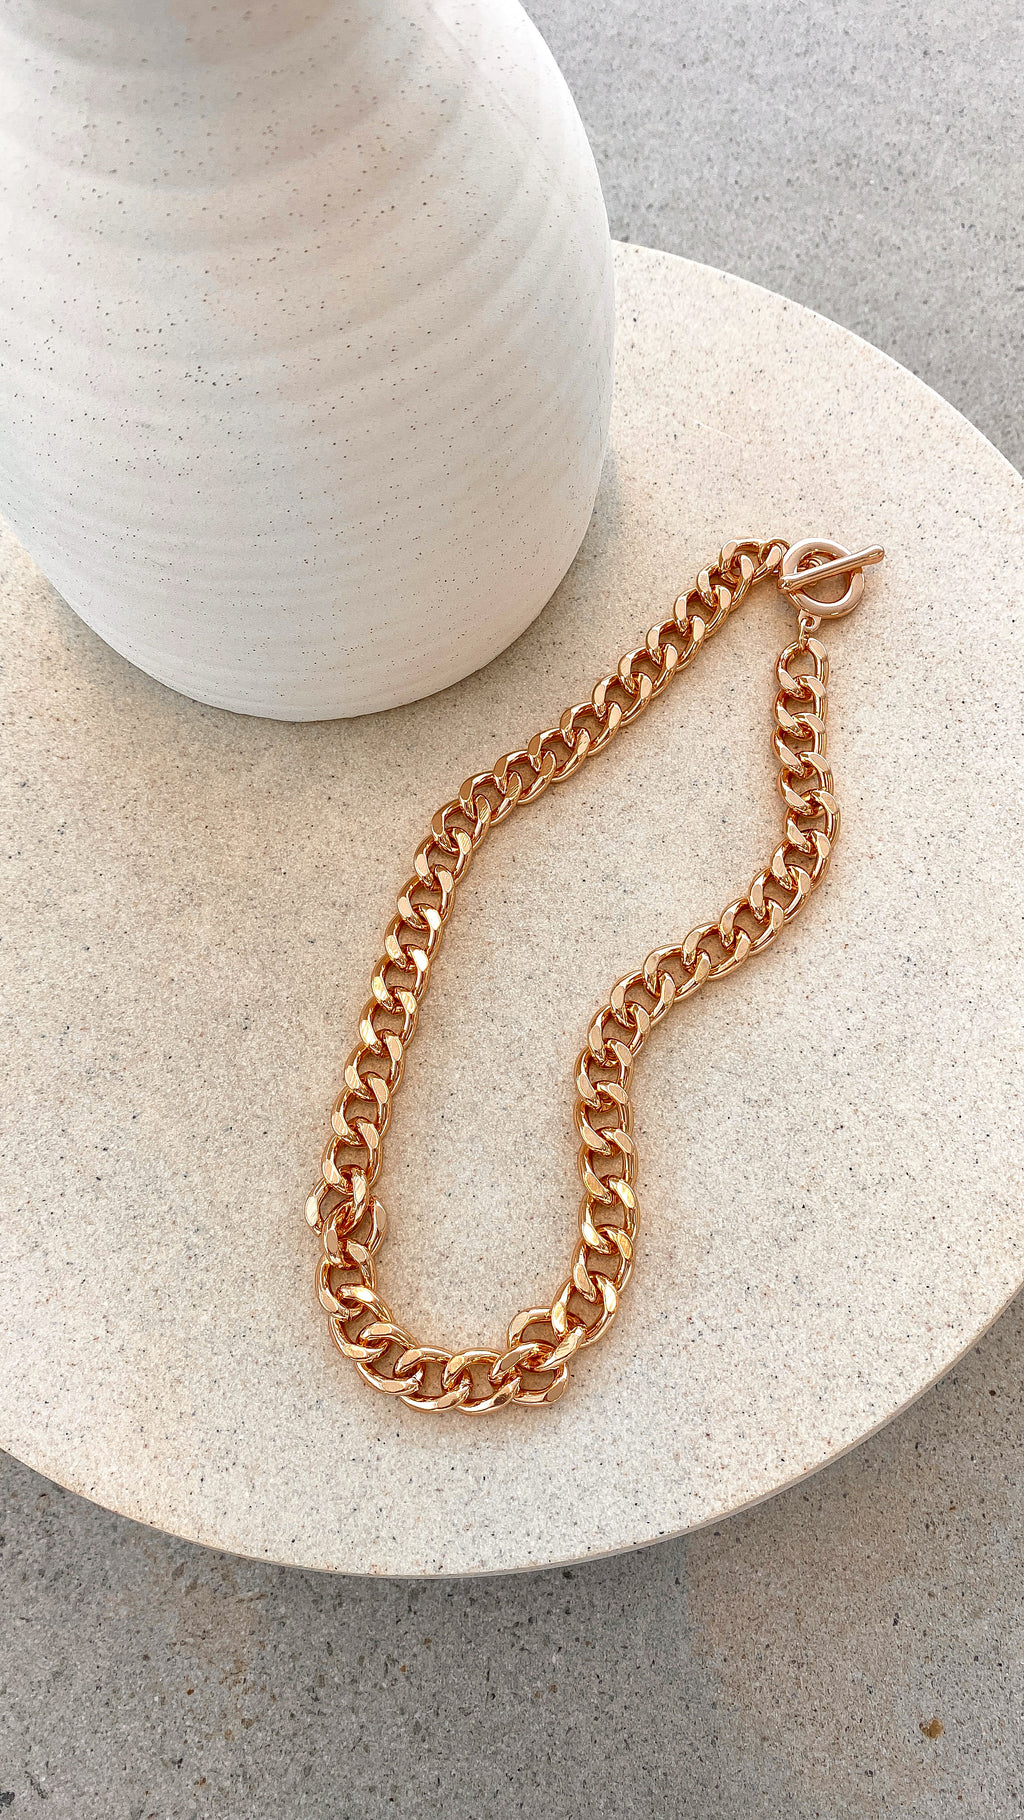 Chunky Fob Chain Necklace - Gold - Billy J